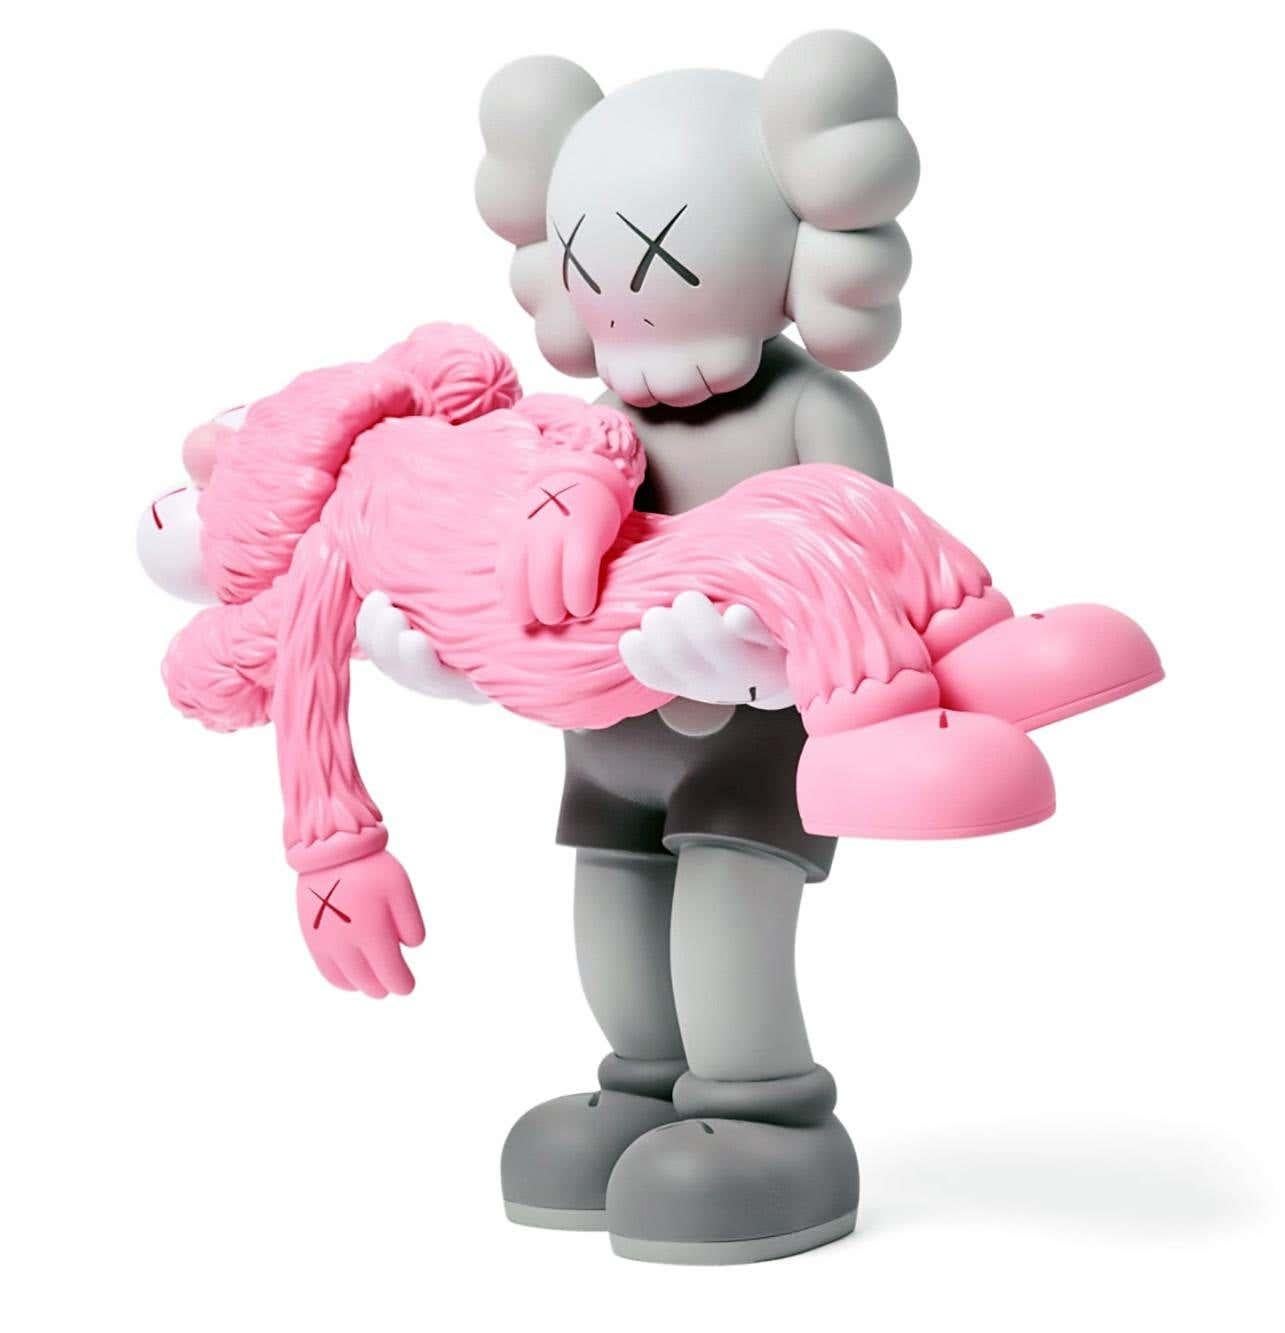 KAWS Grey GONE, new & unopened in its original packaging (KAWS Grey & Pink GONE). 
This standout KAWS figurative sculpture is a well-received work and variation of KAWS' large scale GONE - a key highlight of KAWS’ most recent major solo exhibition,